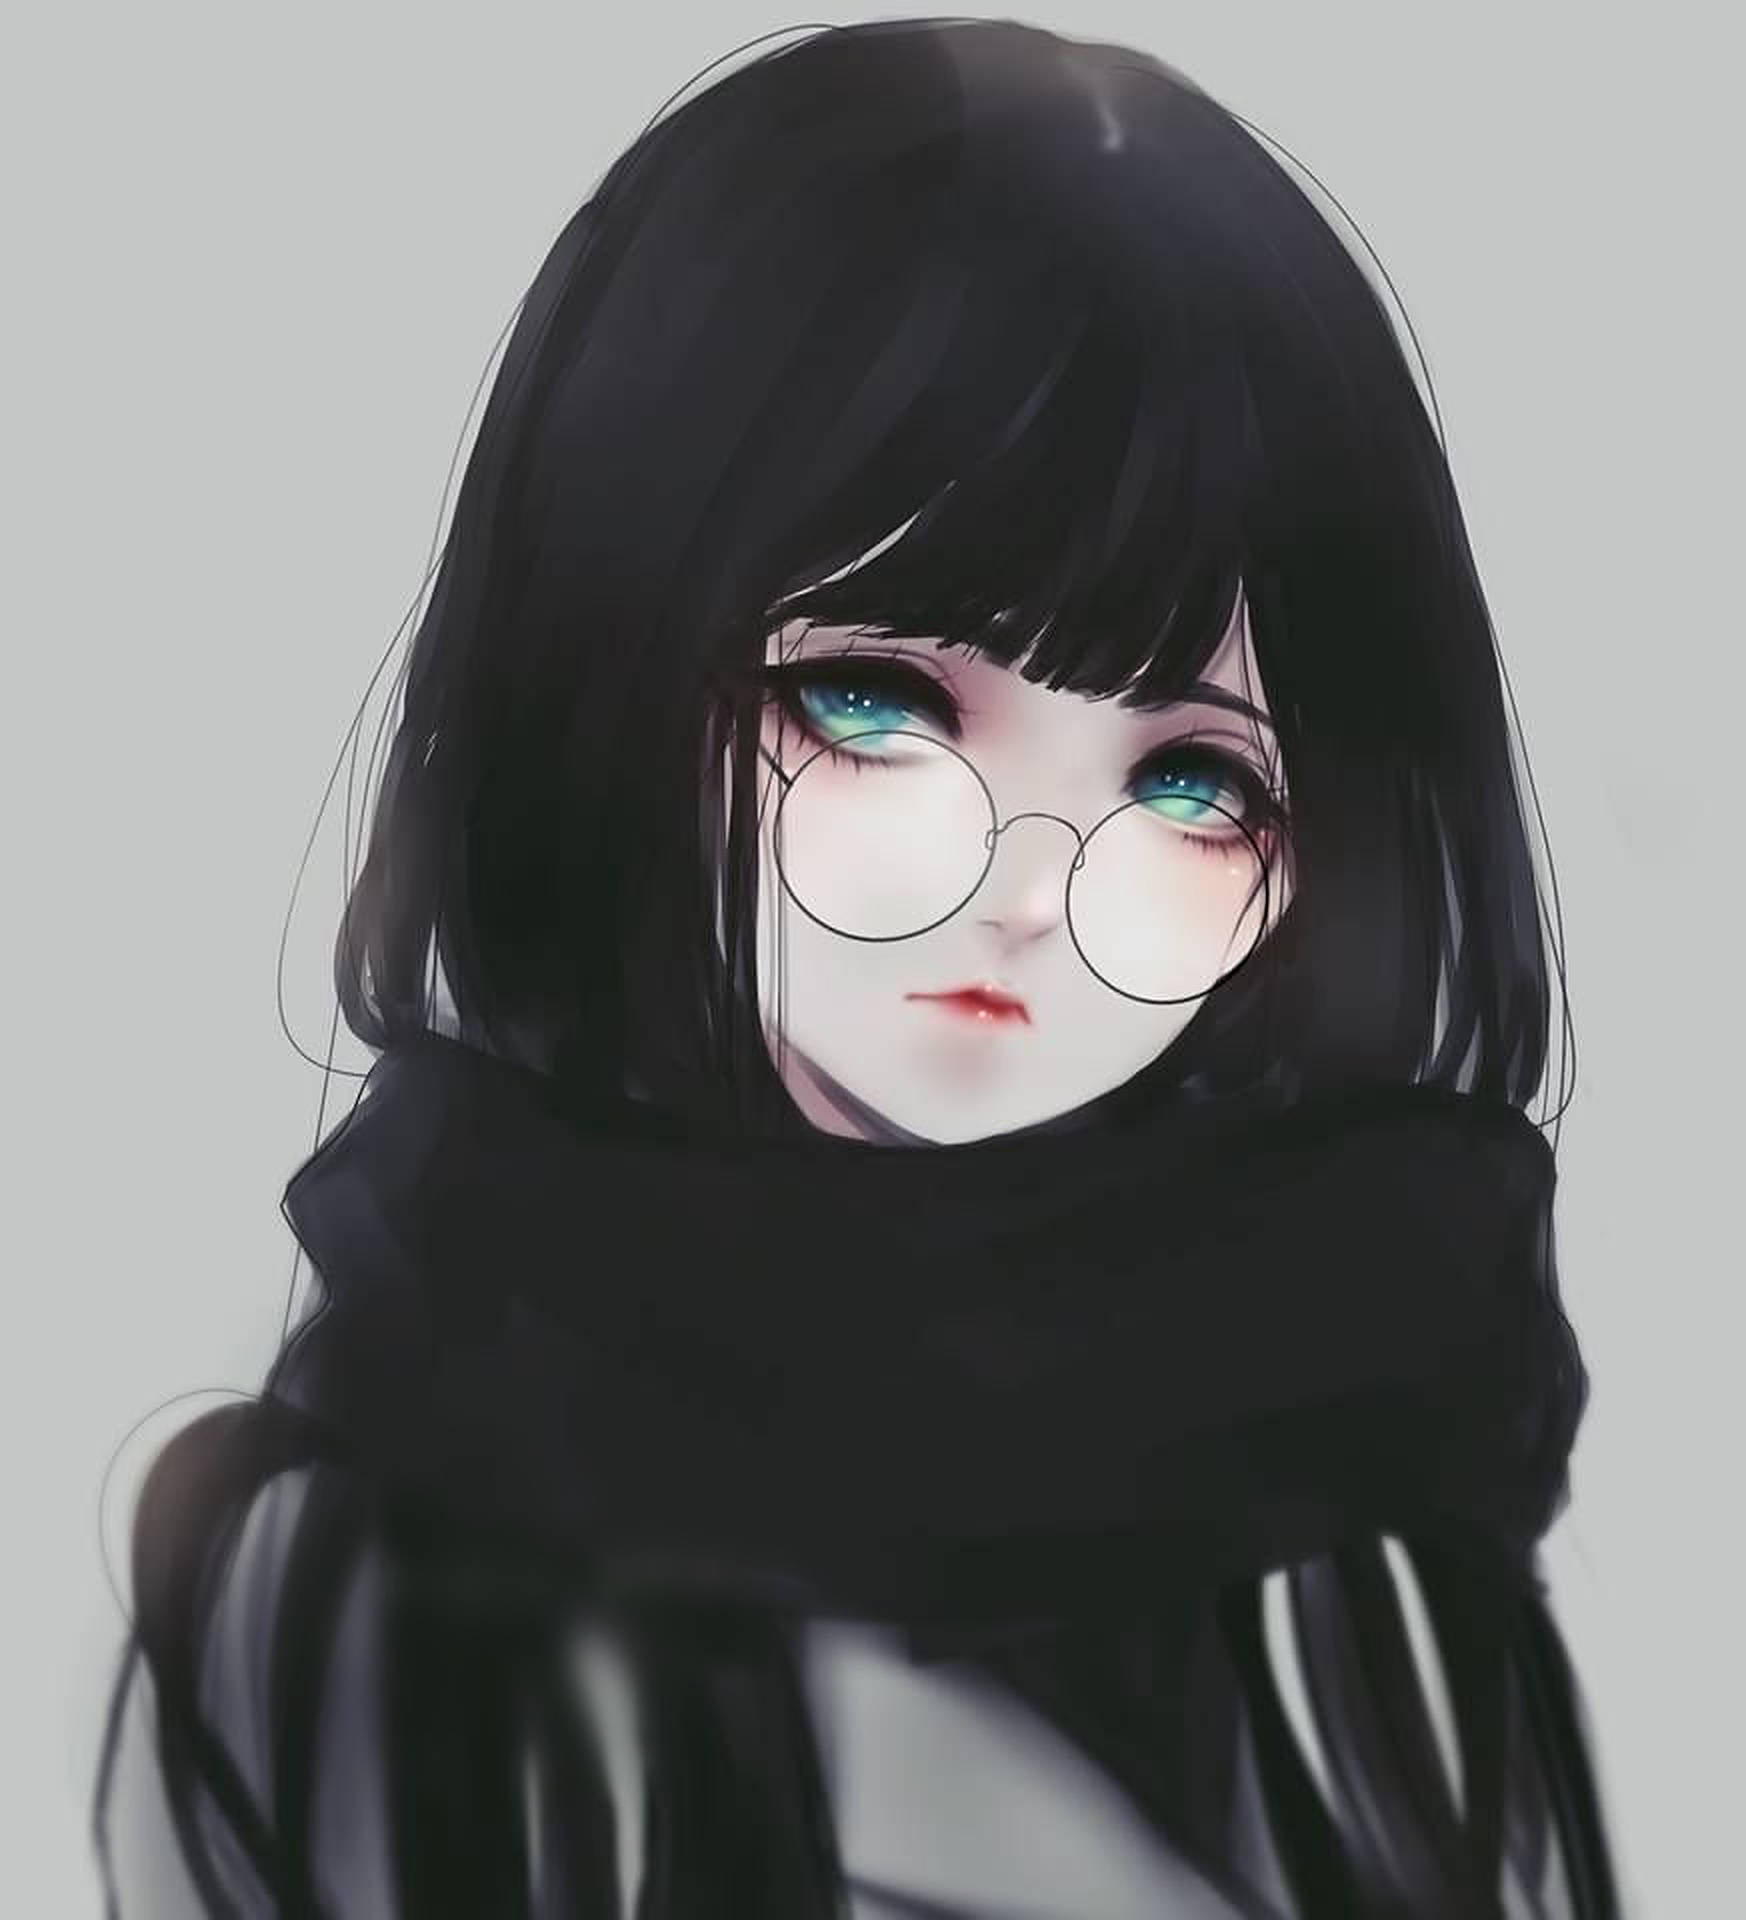 Download Anime Girl With Glasses Emo Pfp Wallpaper | Wallpapers.com